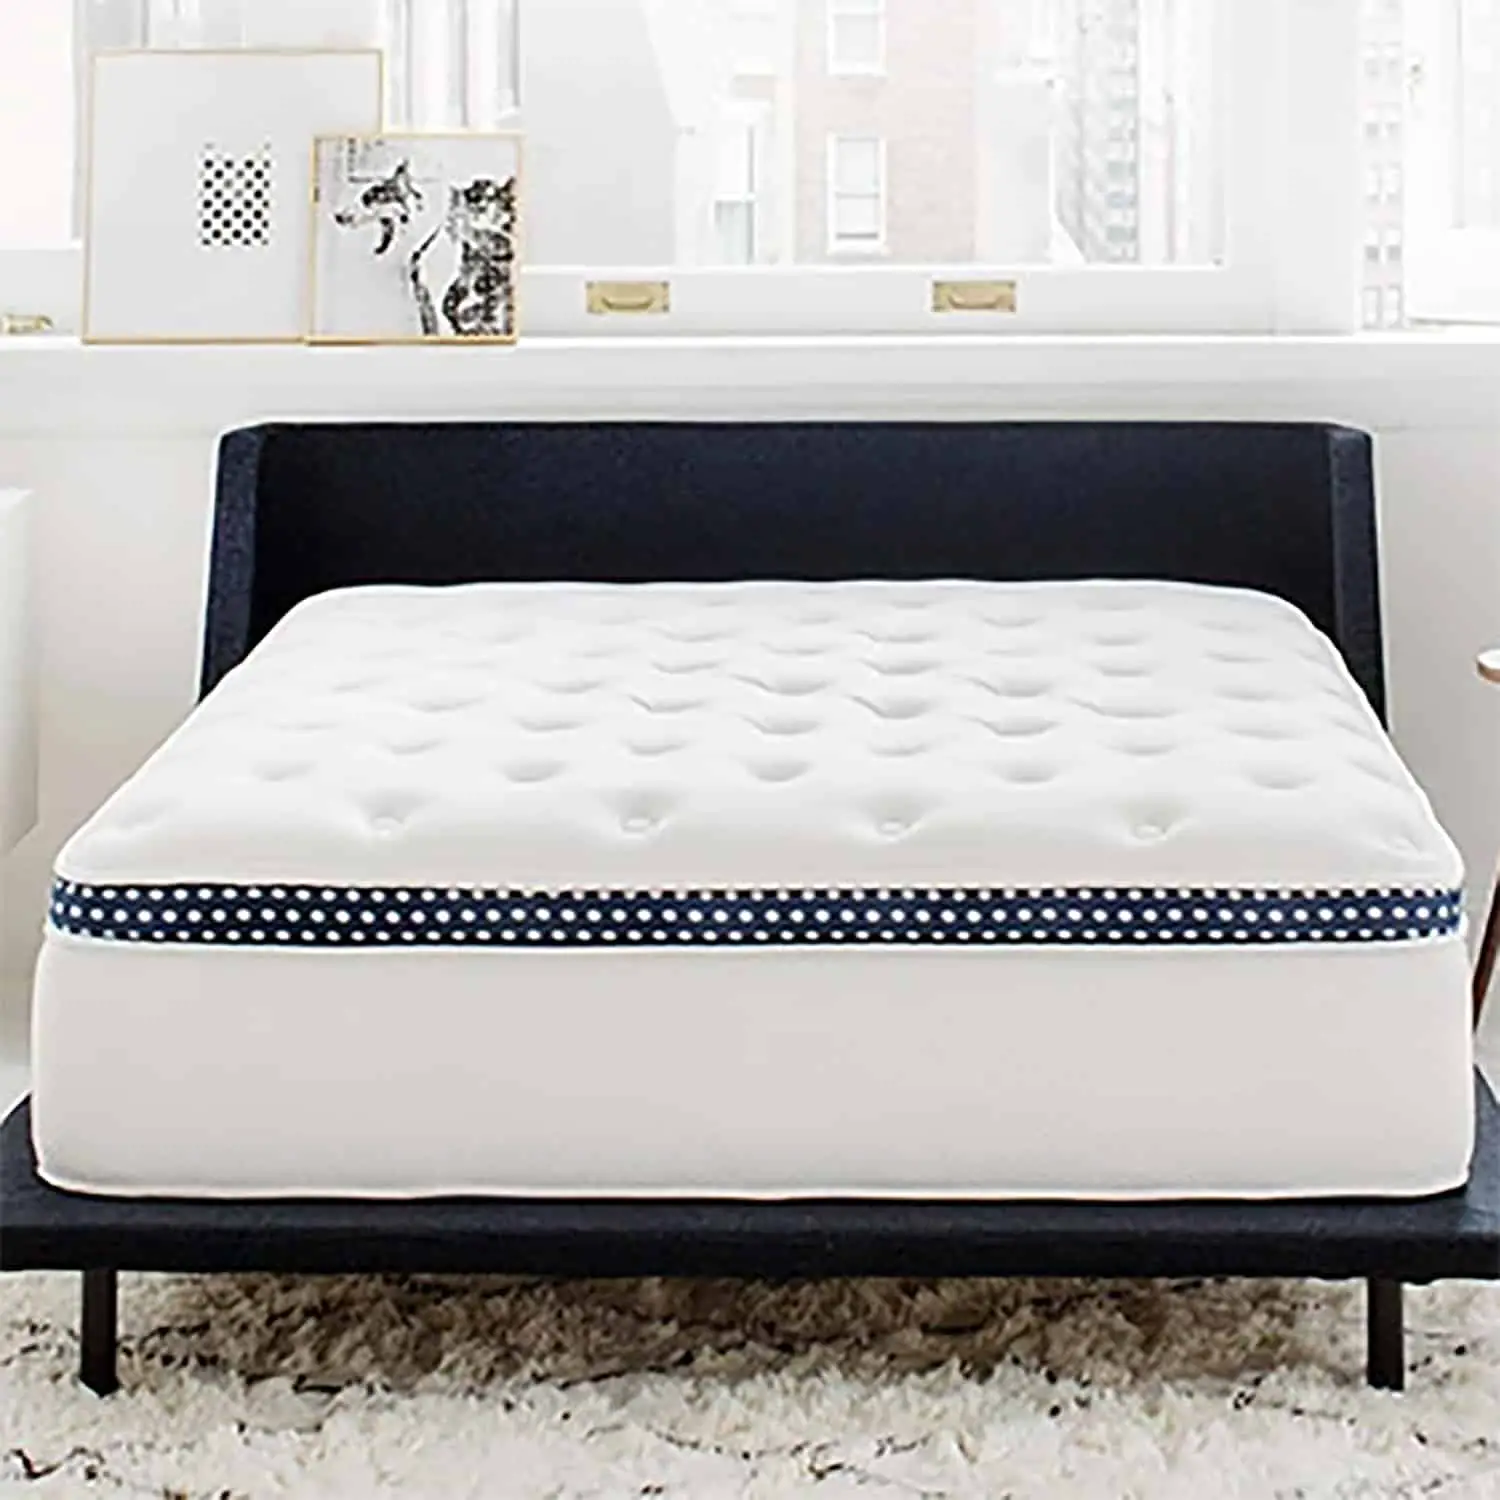 10 Best Mattresses for Back Pain 2021: Tested by Experts